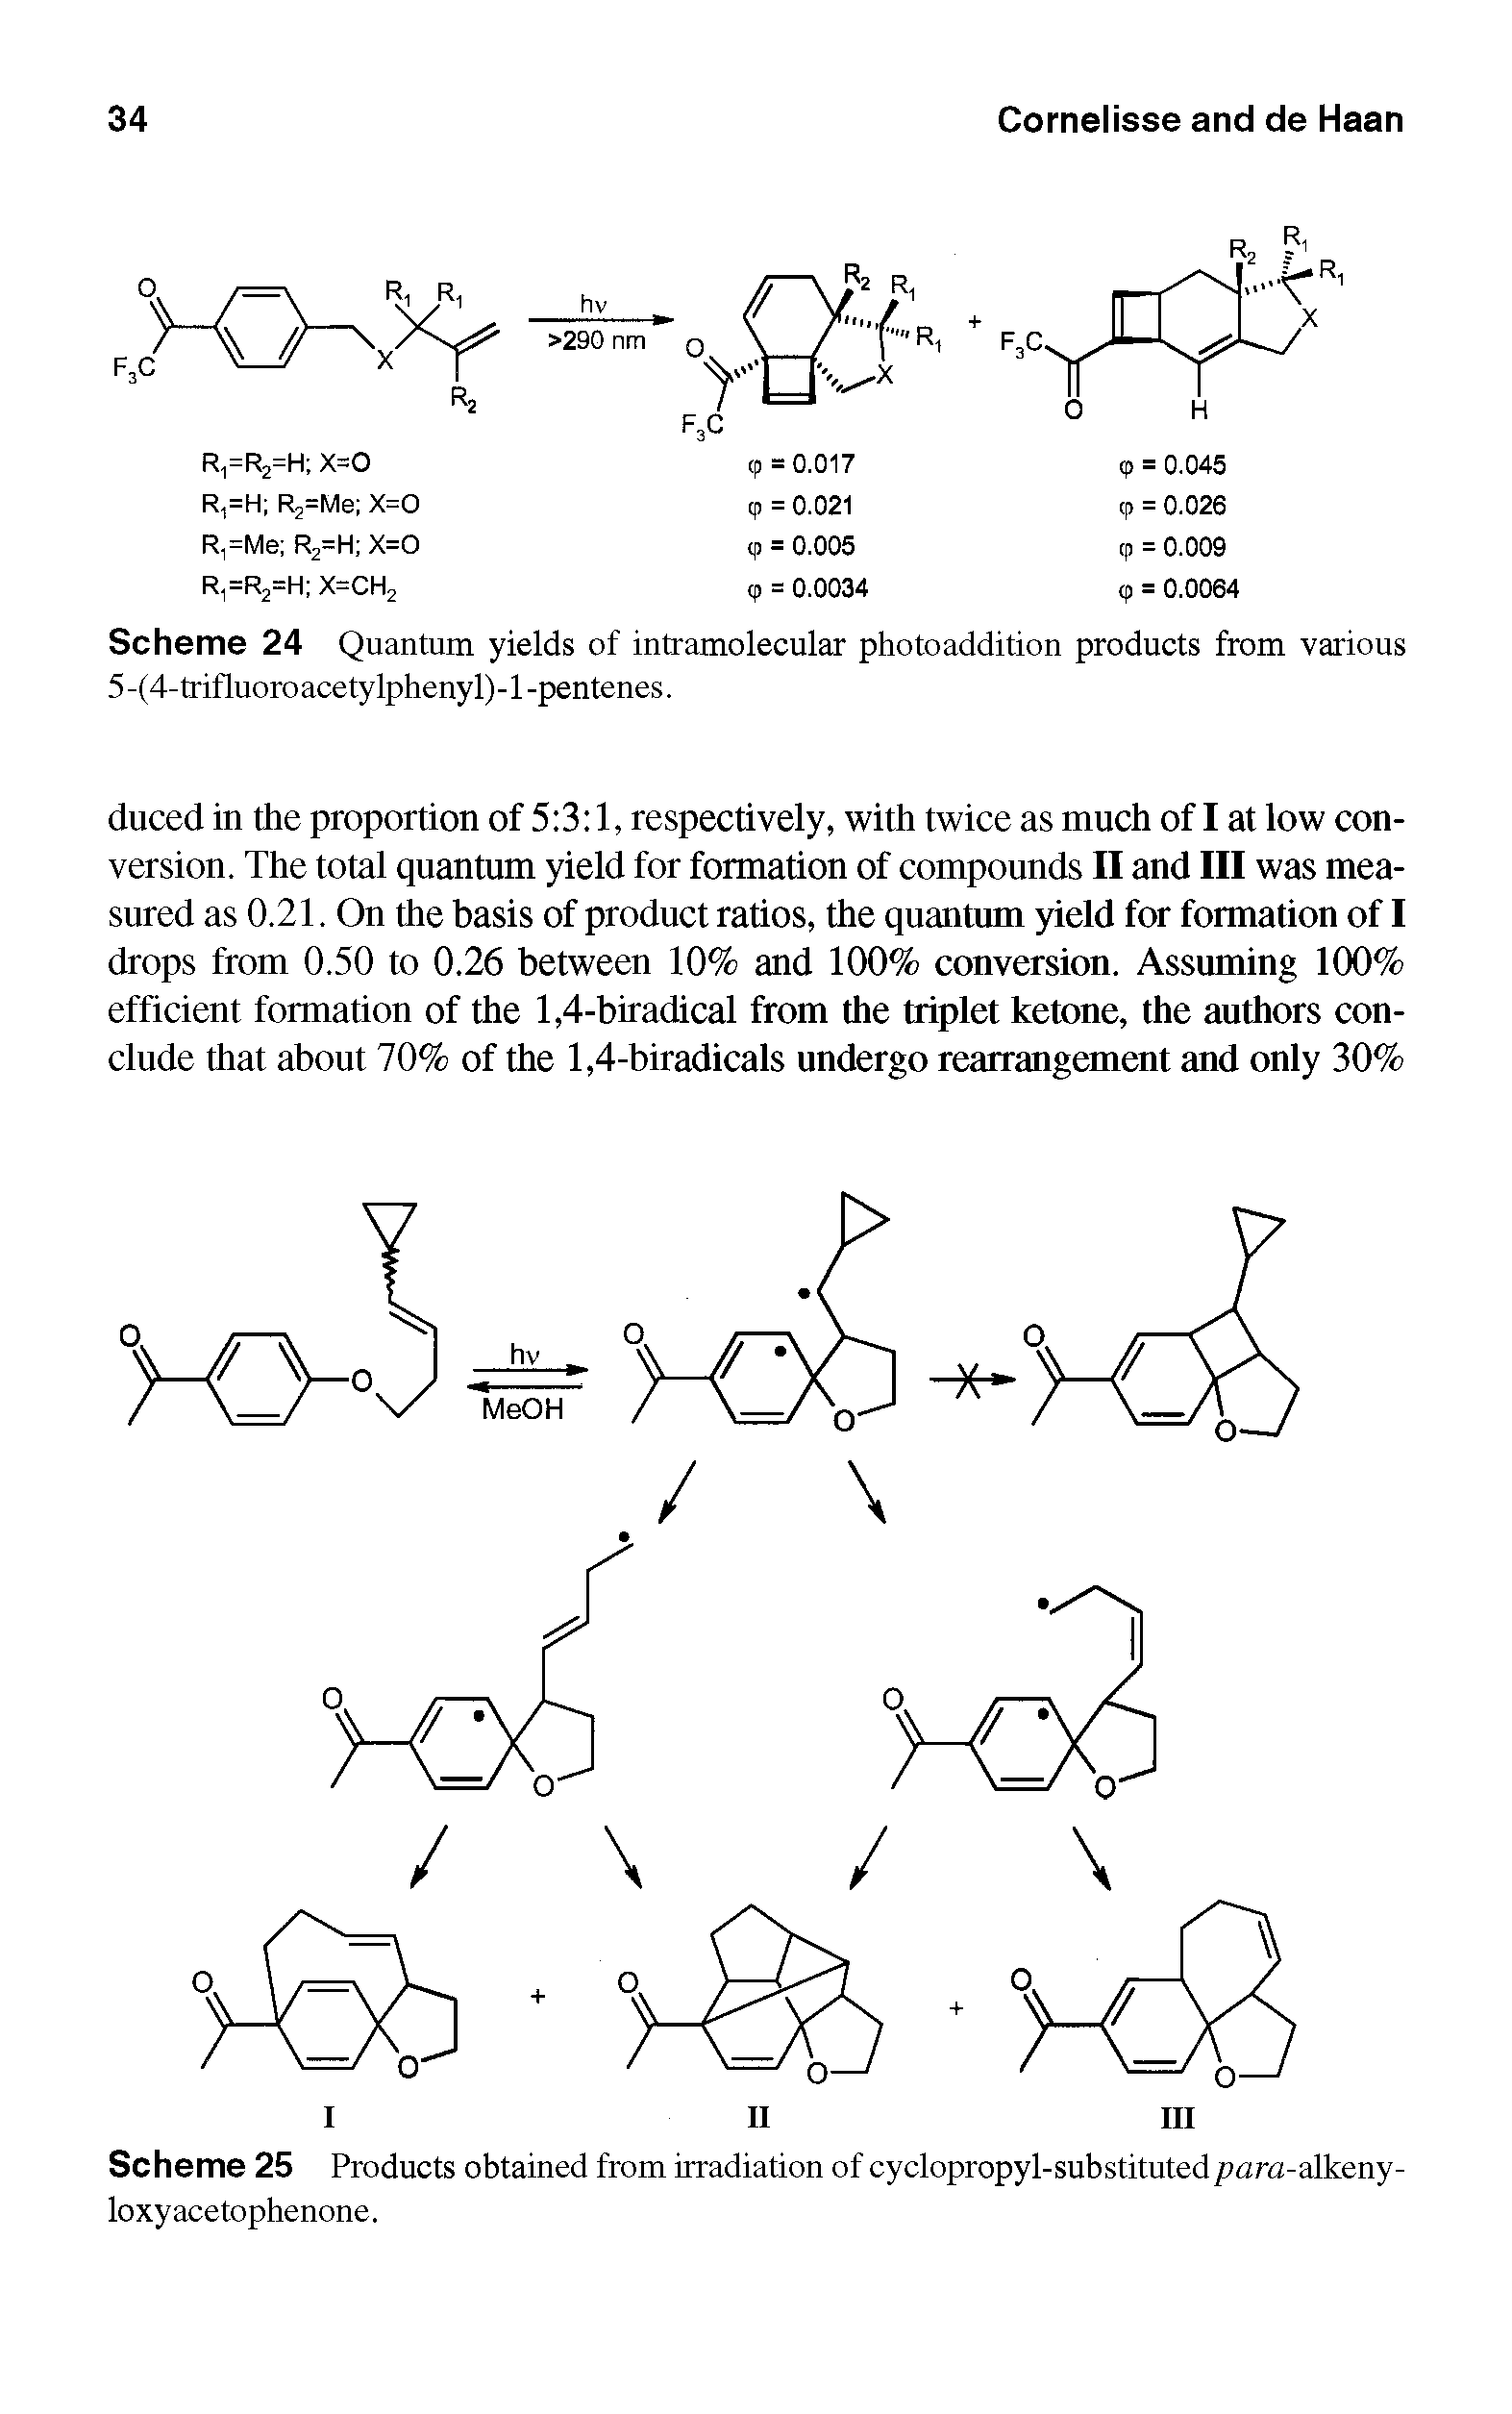 Scheme 24 Quantum yields of intramolecular photoaddition products from various 5 -(4-trifluoro acety lpheny 1) -1-pentenes.